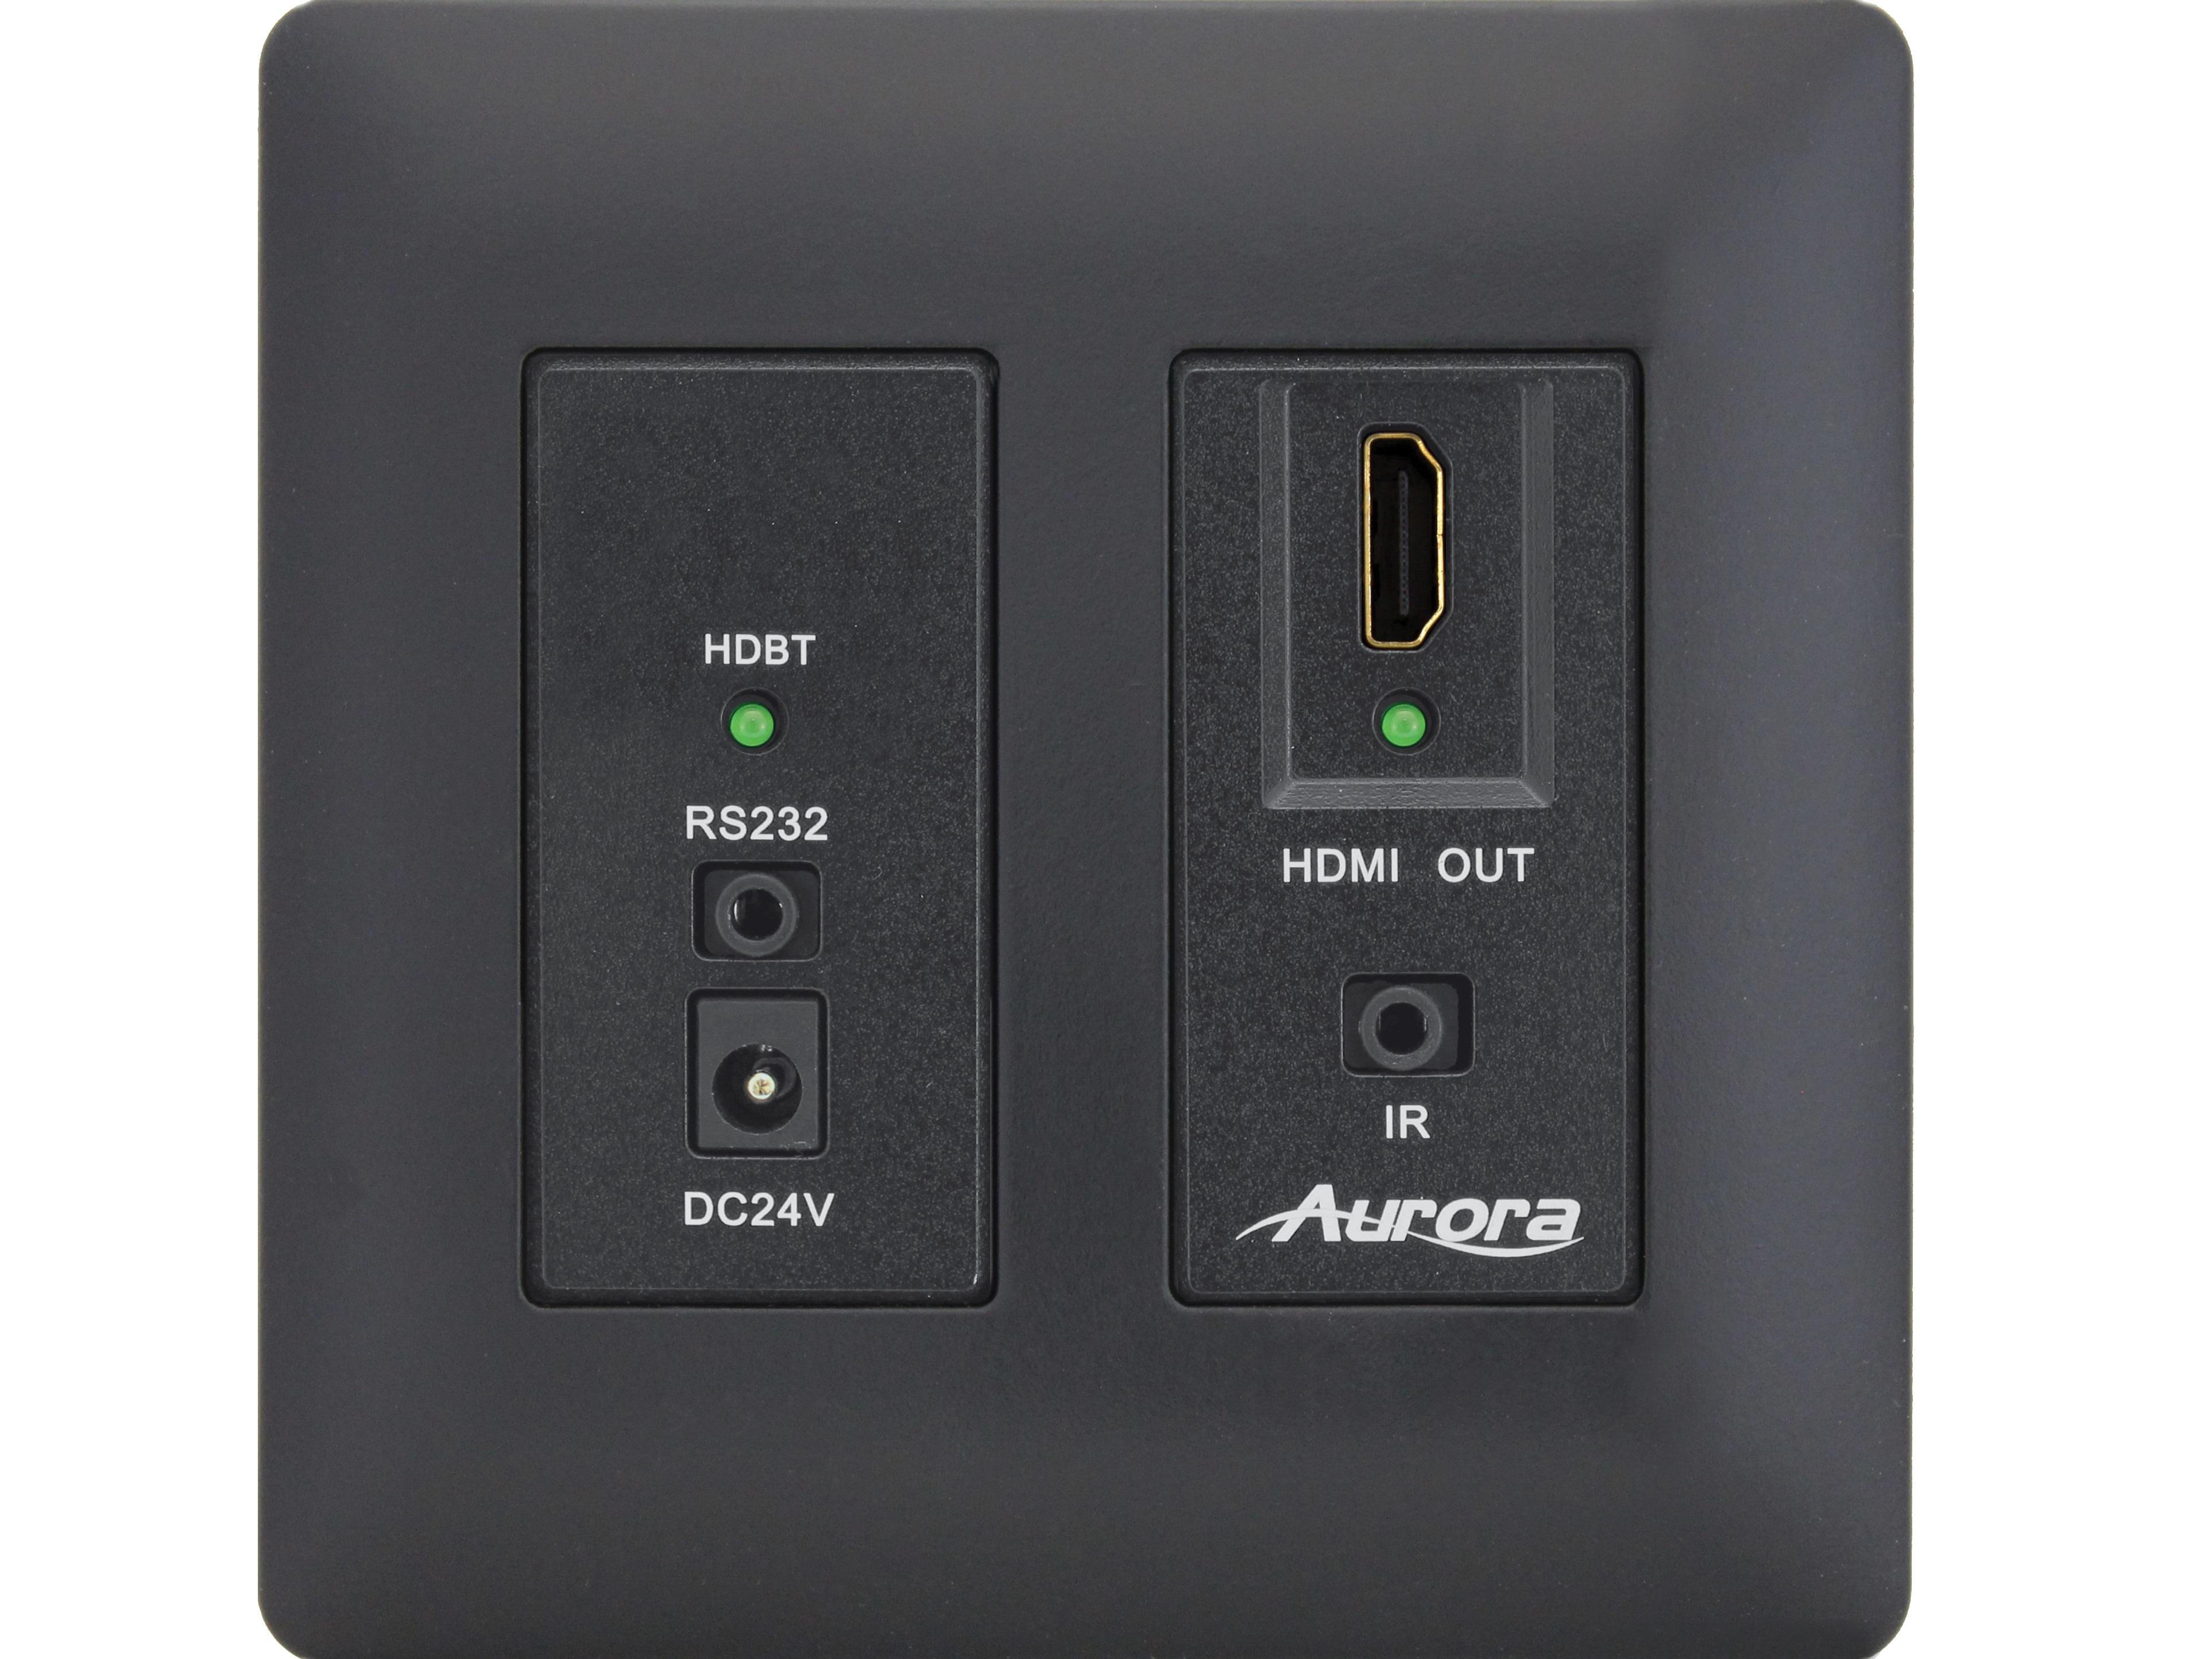 DXW-2-RX1-B-K HDMI HDBaseT Wall Plate Receiver with RS-232/IR/Black by Aurora Multimedia